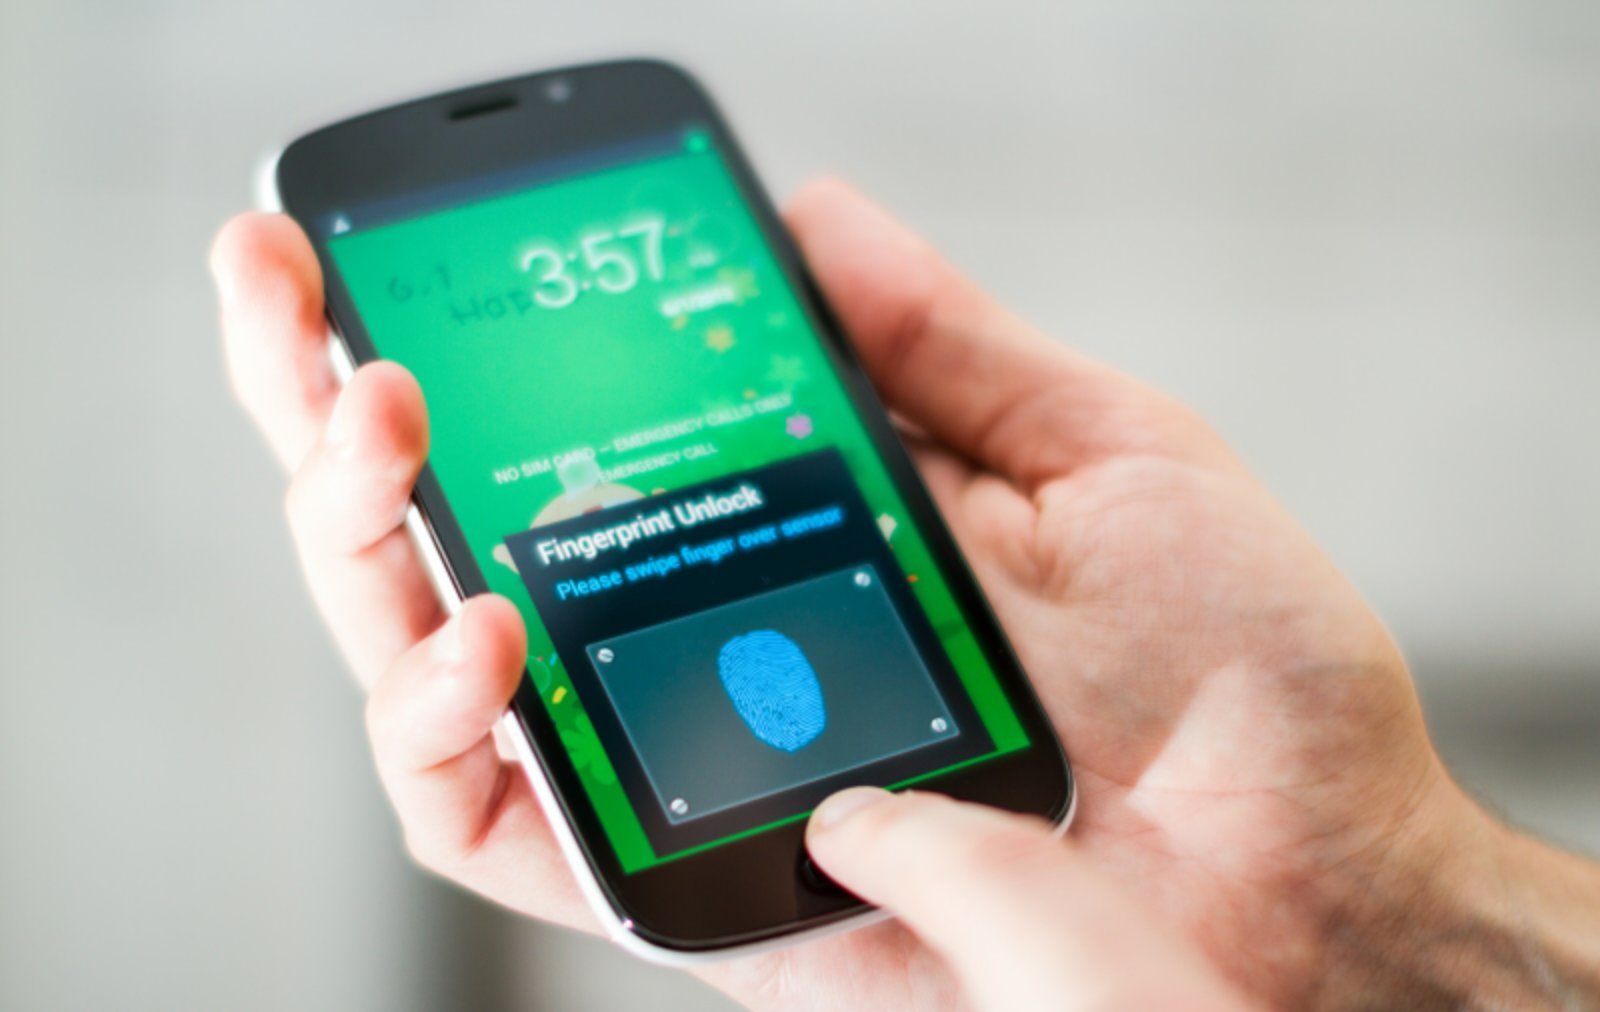 First You Can Unlock Your Phone with a Fingerprint, Now You can Pay too